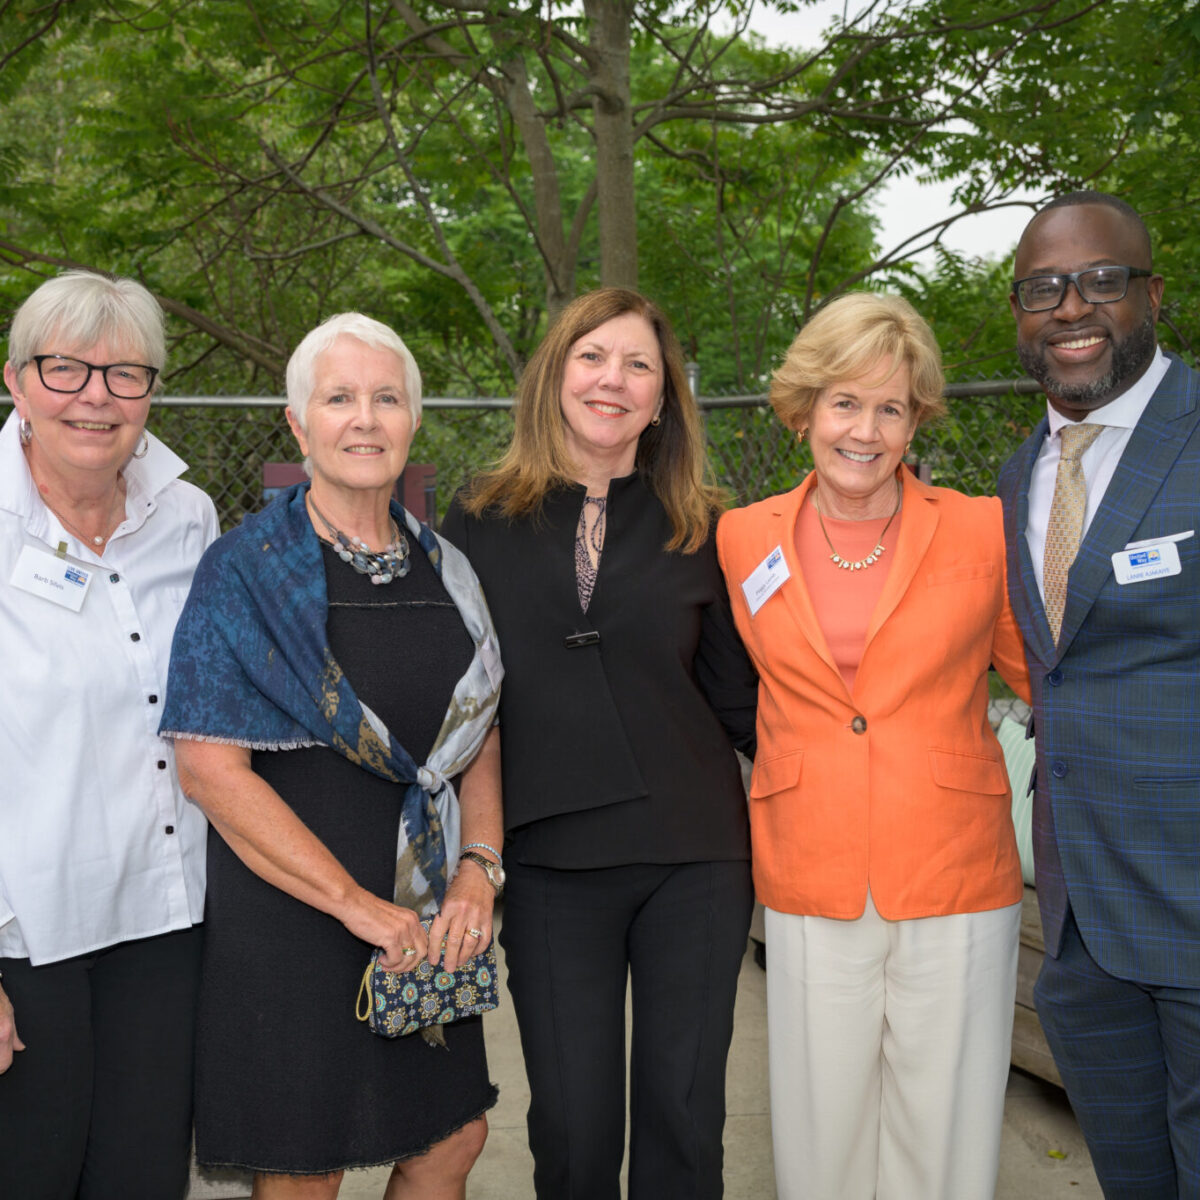 Roberta Butler, recipient of the Tocqueville United Award 2023, poses with other attendees.